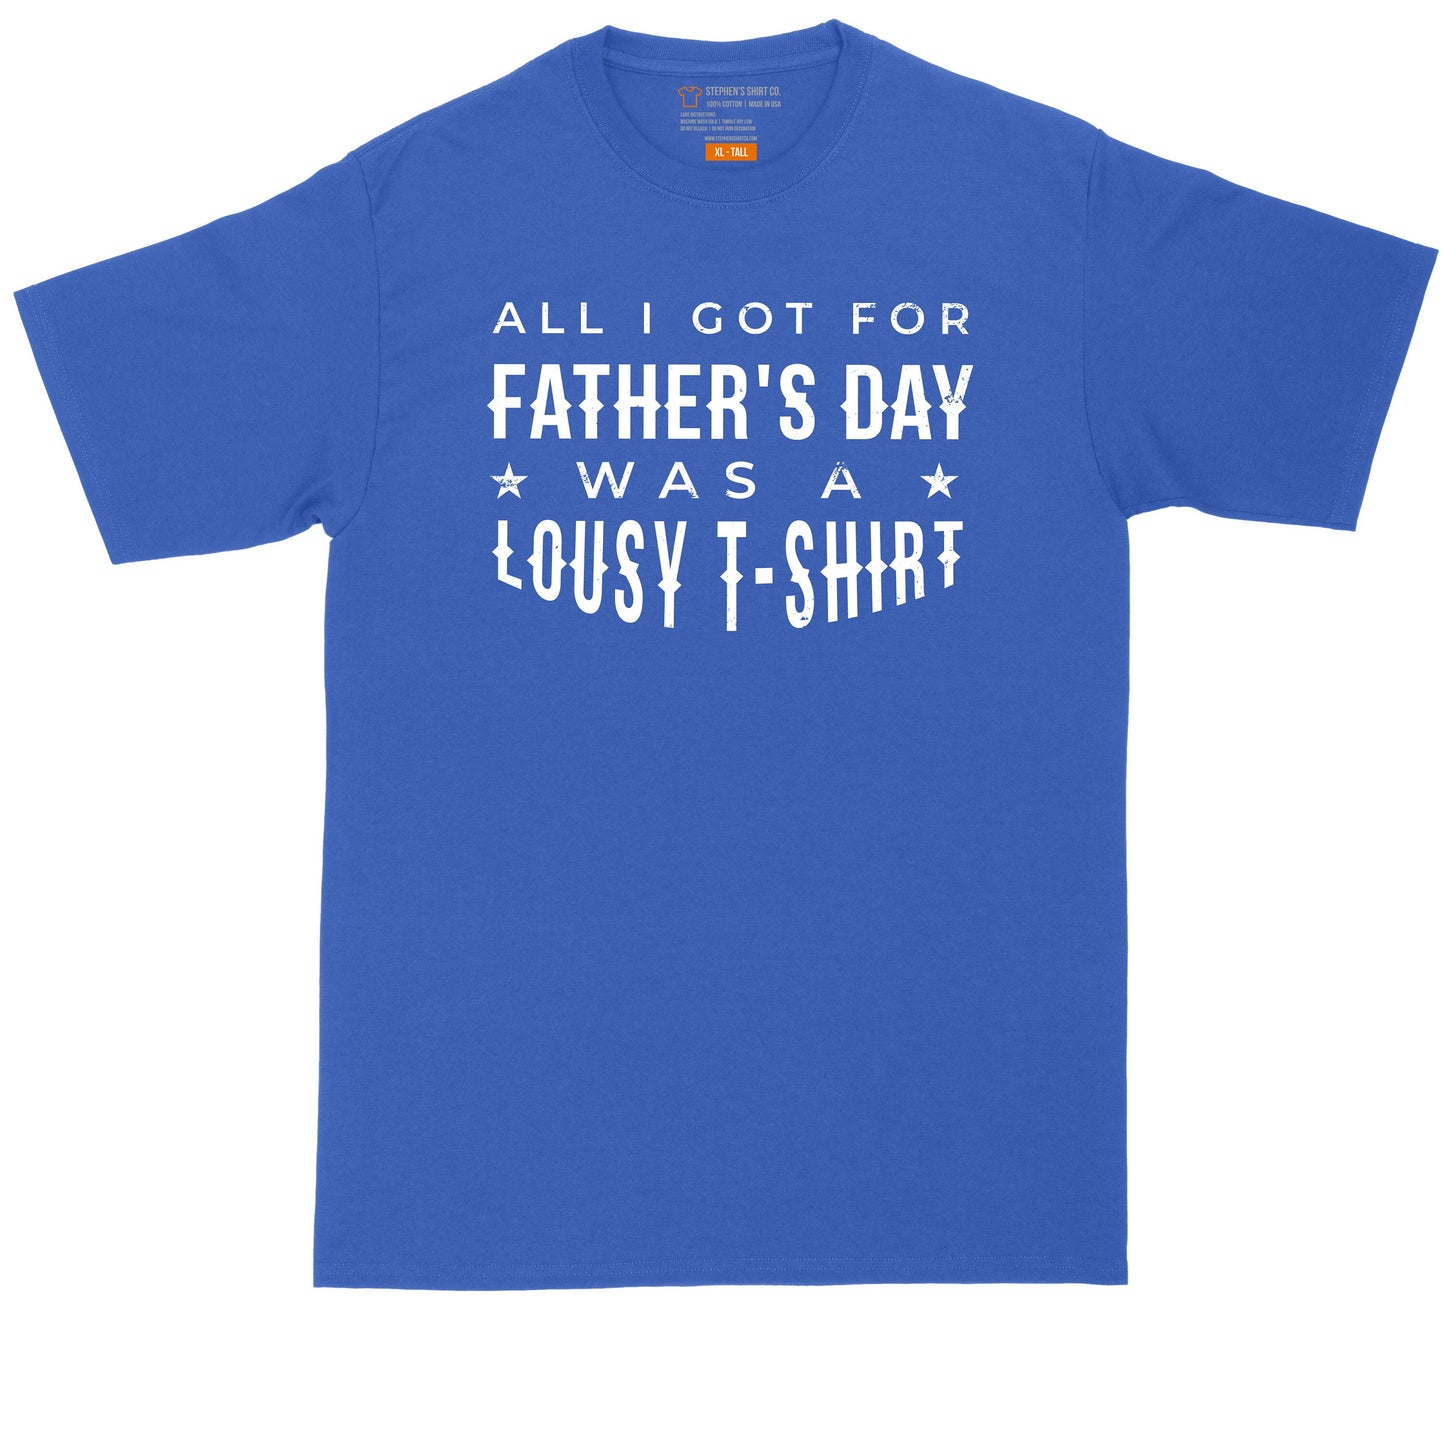 All I Got for Fathers Day is a Lousy T-Shirt | Big and Tall Men | Fathers Day Present | Gift for Him